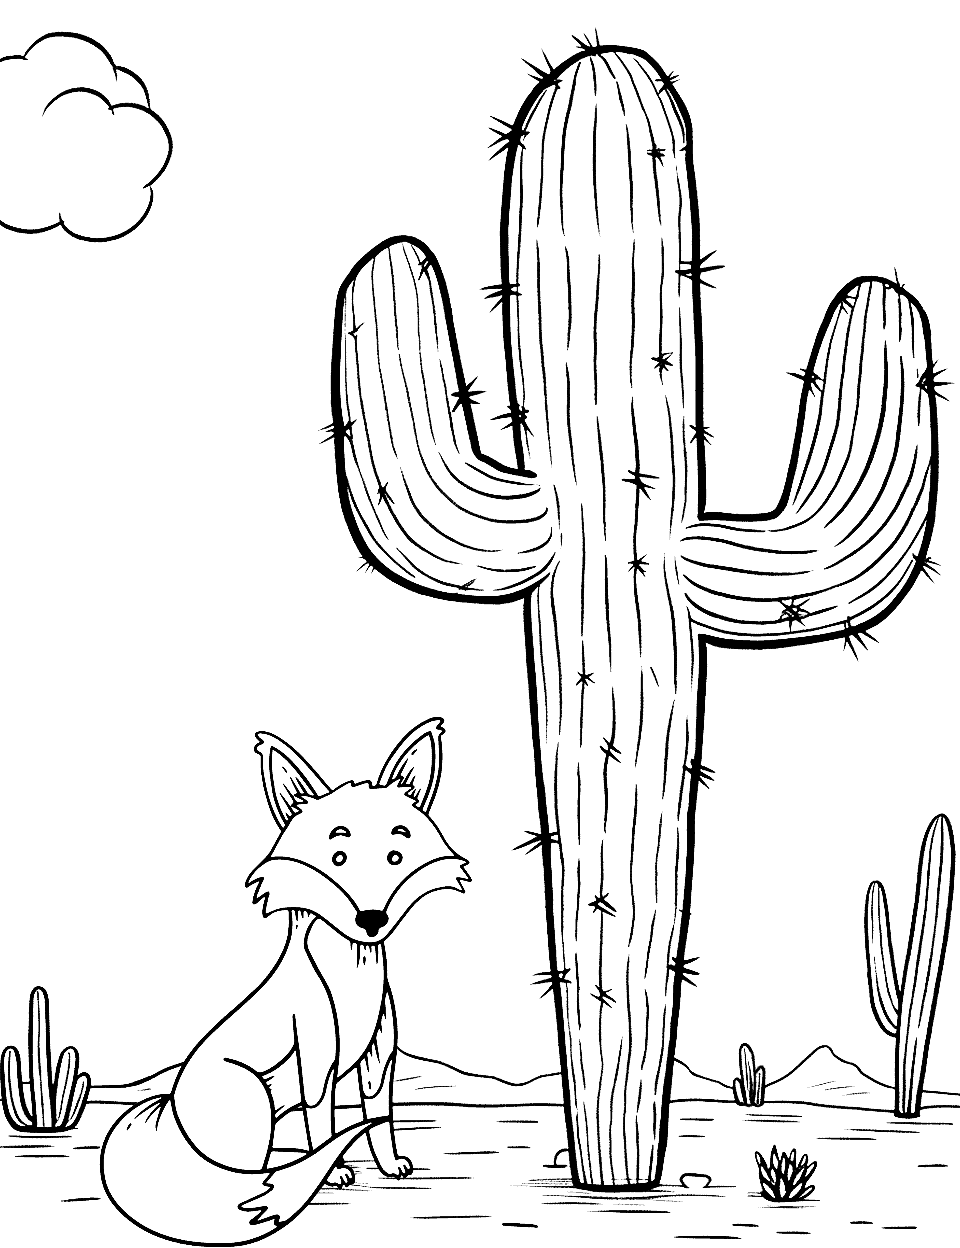 Desert Animal and Cactus Coloring Page - A single desert animal, like a coyote or a lizard, next to a cactus in the Sonoran Desert.